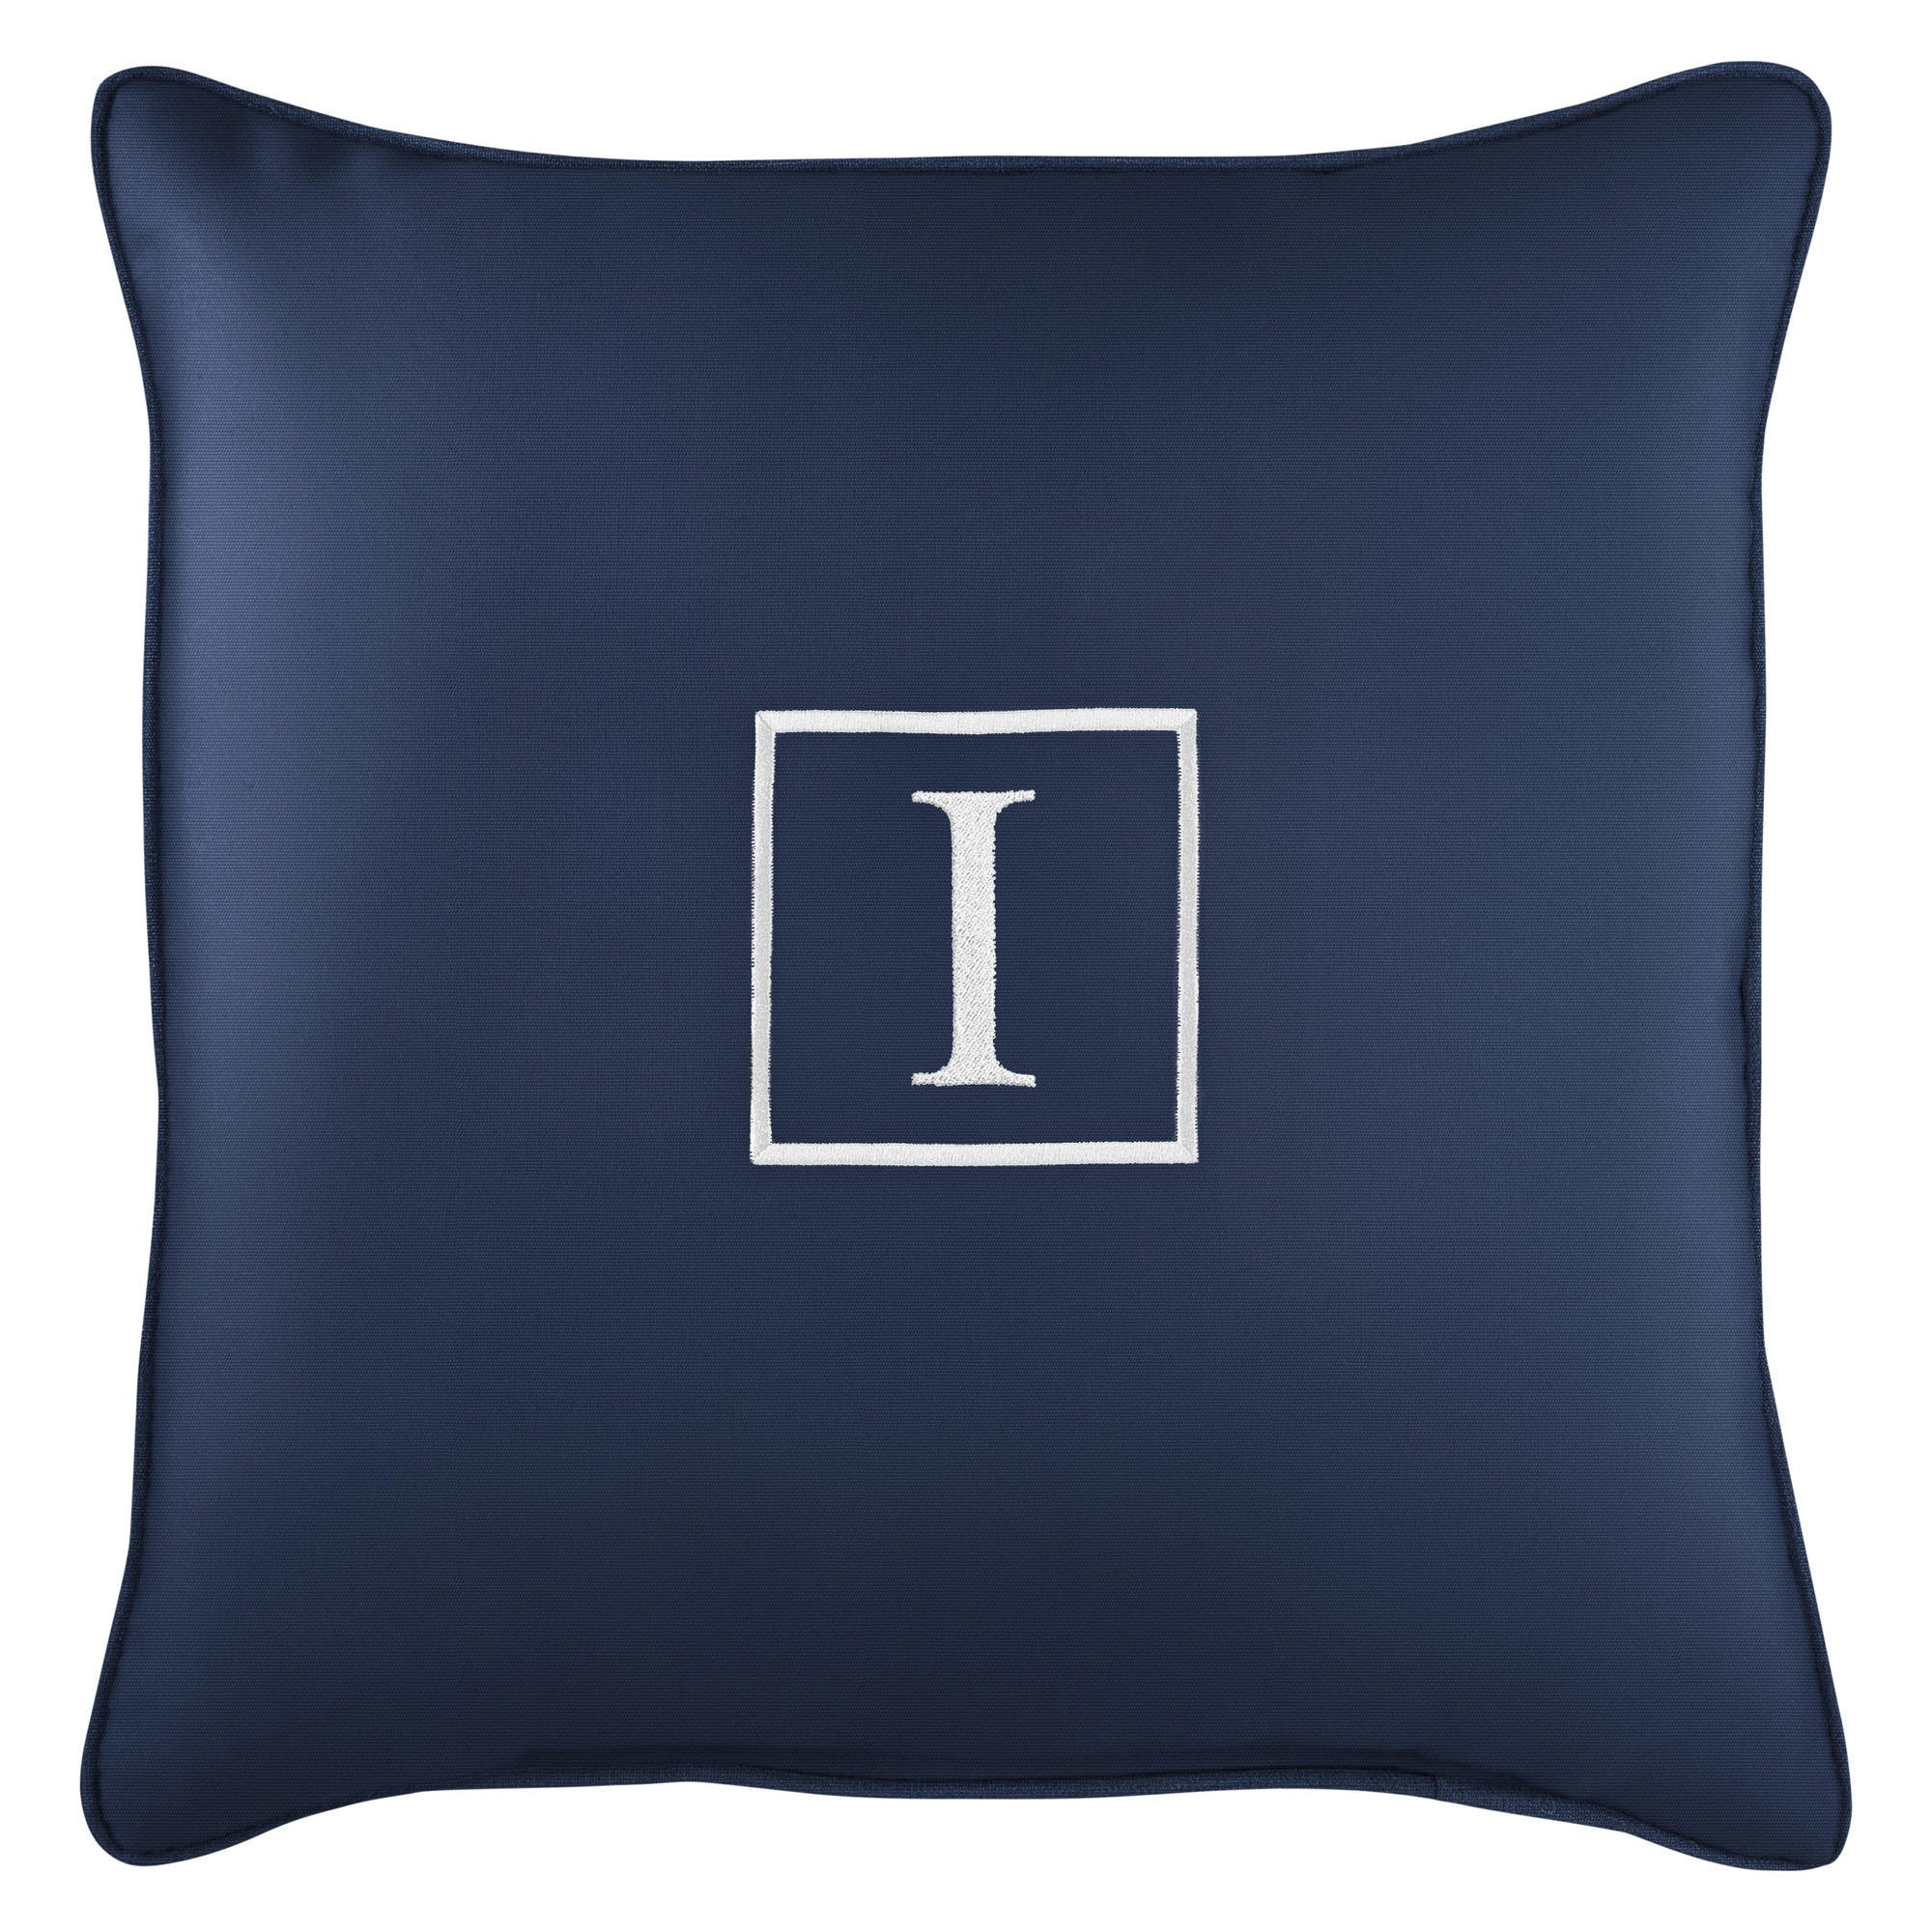 Outdoor Living and Style 18" Navy Blue Sunbrella Square Indoor/Outdoor Monogram "I" Single Embroidered Throw Pillow